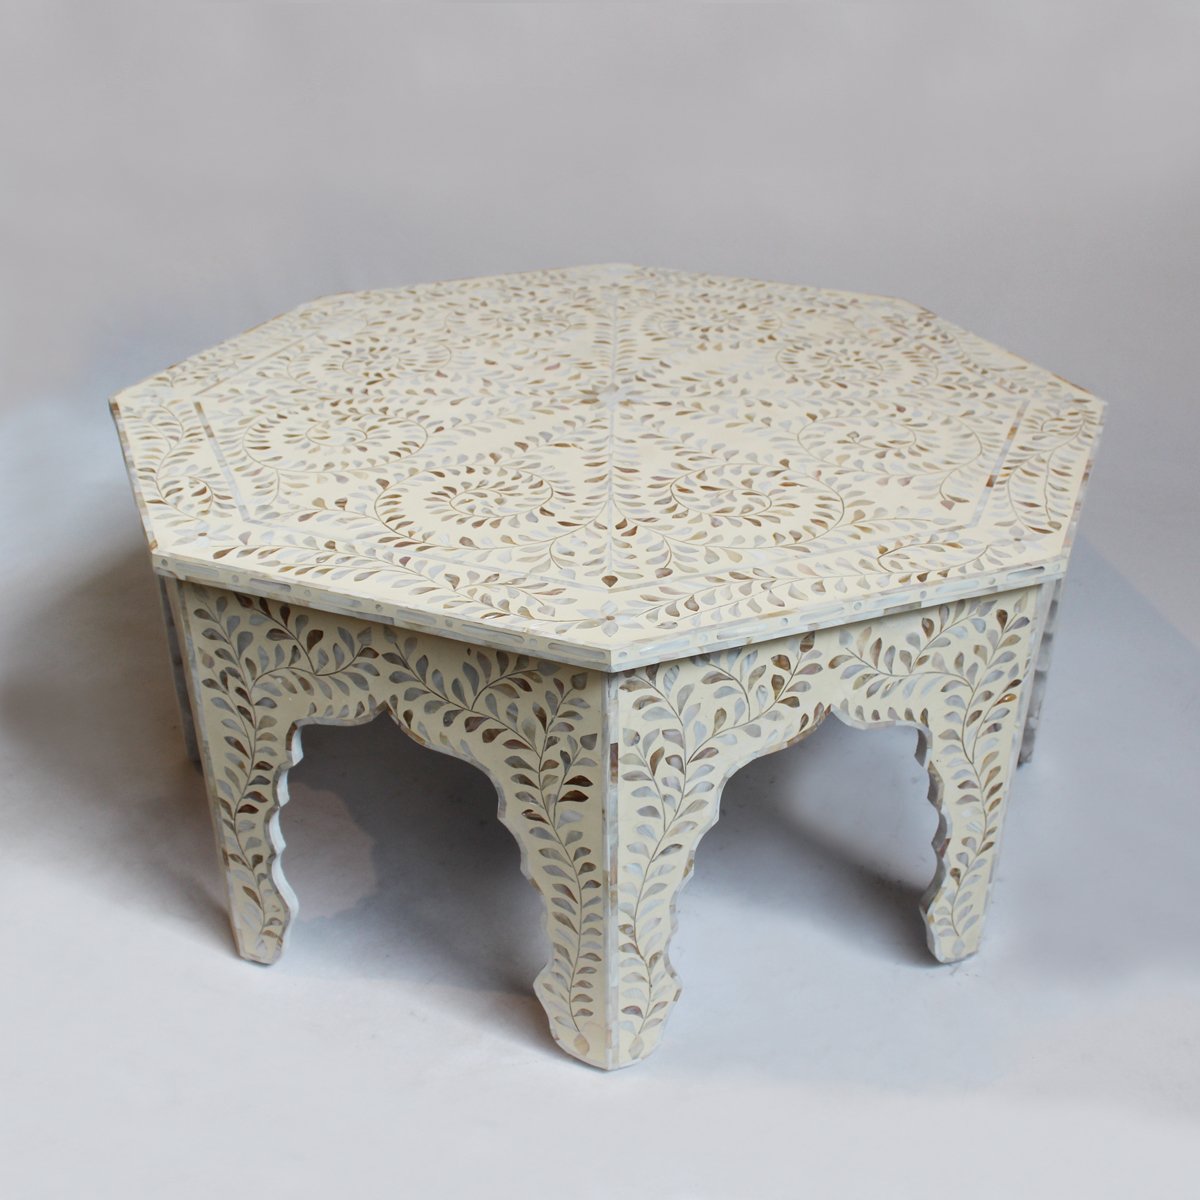 MOP Inlay Floral Octagonal Coffee Table Beige